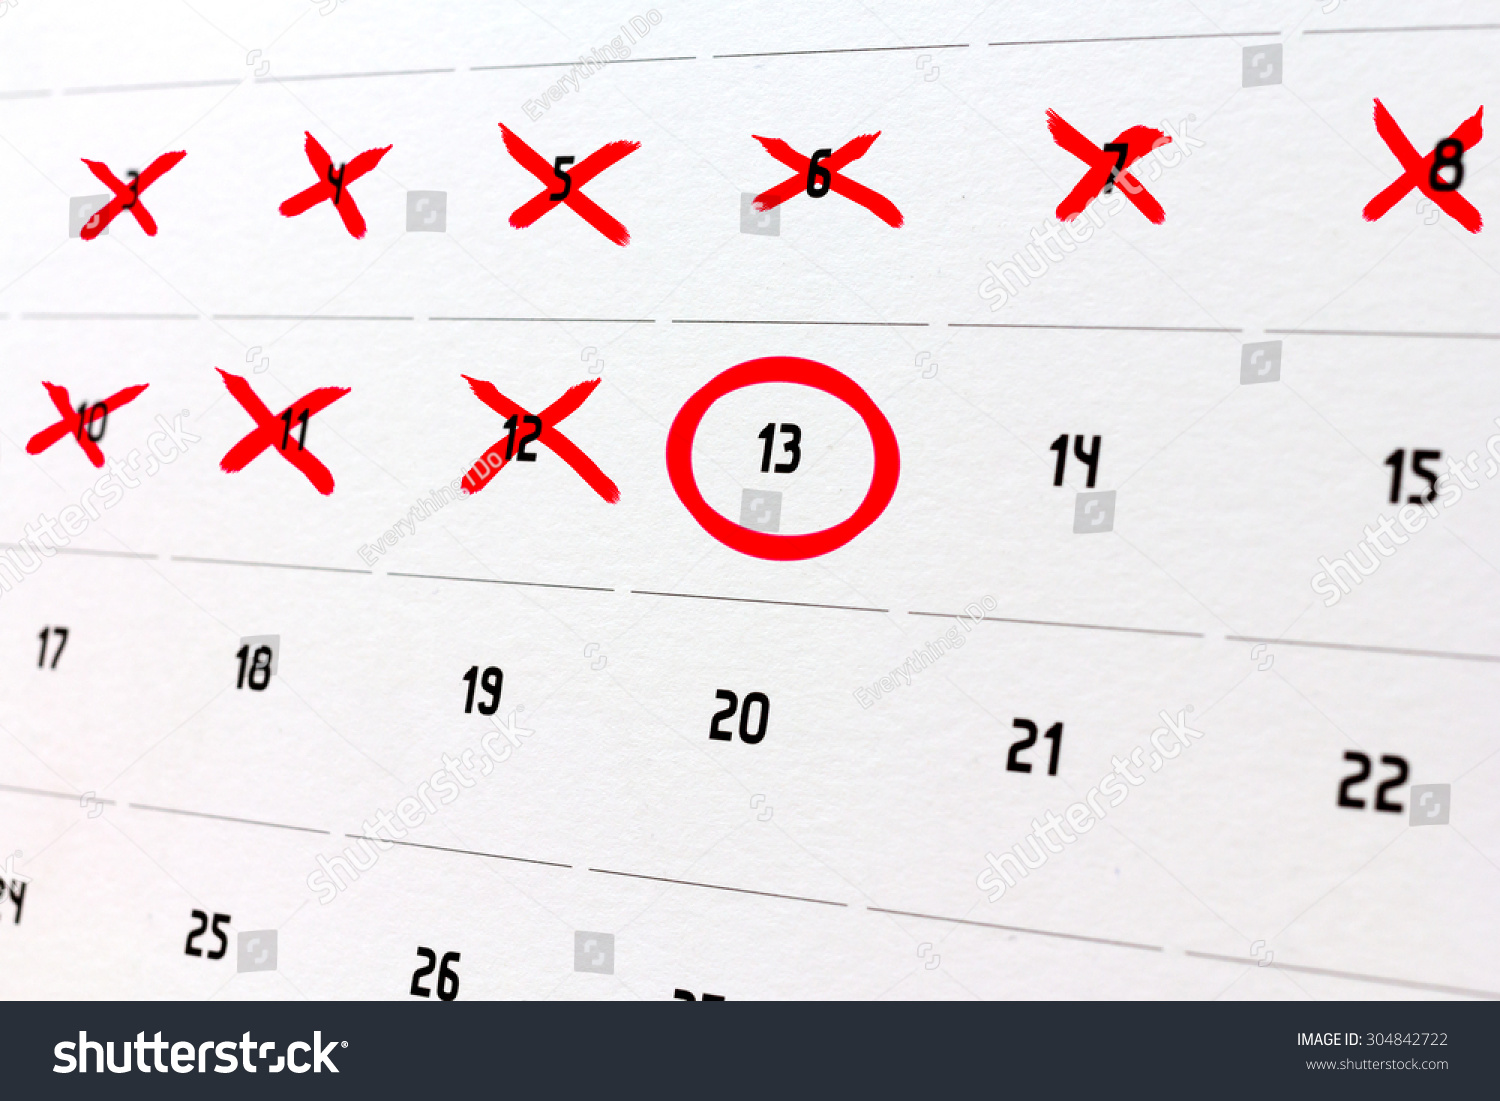 Counting Down The Days On A Calendar Stock Photo 304842722 : Shutterstock